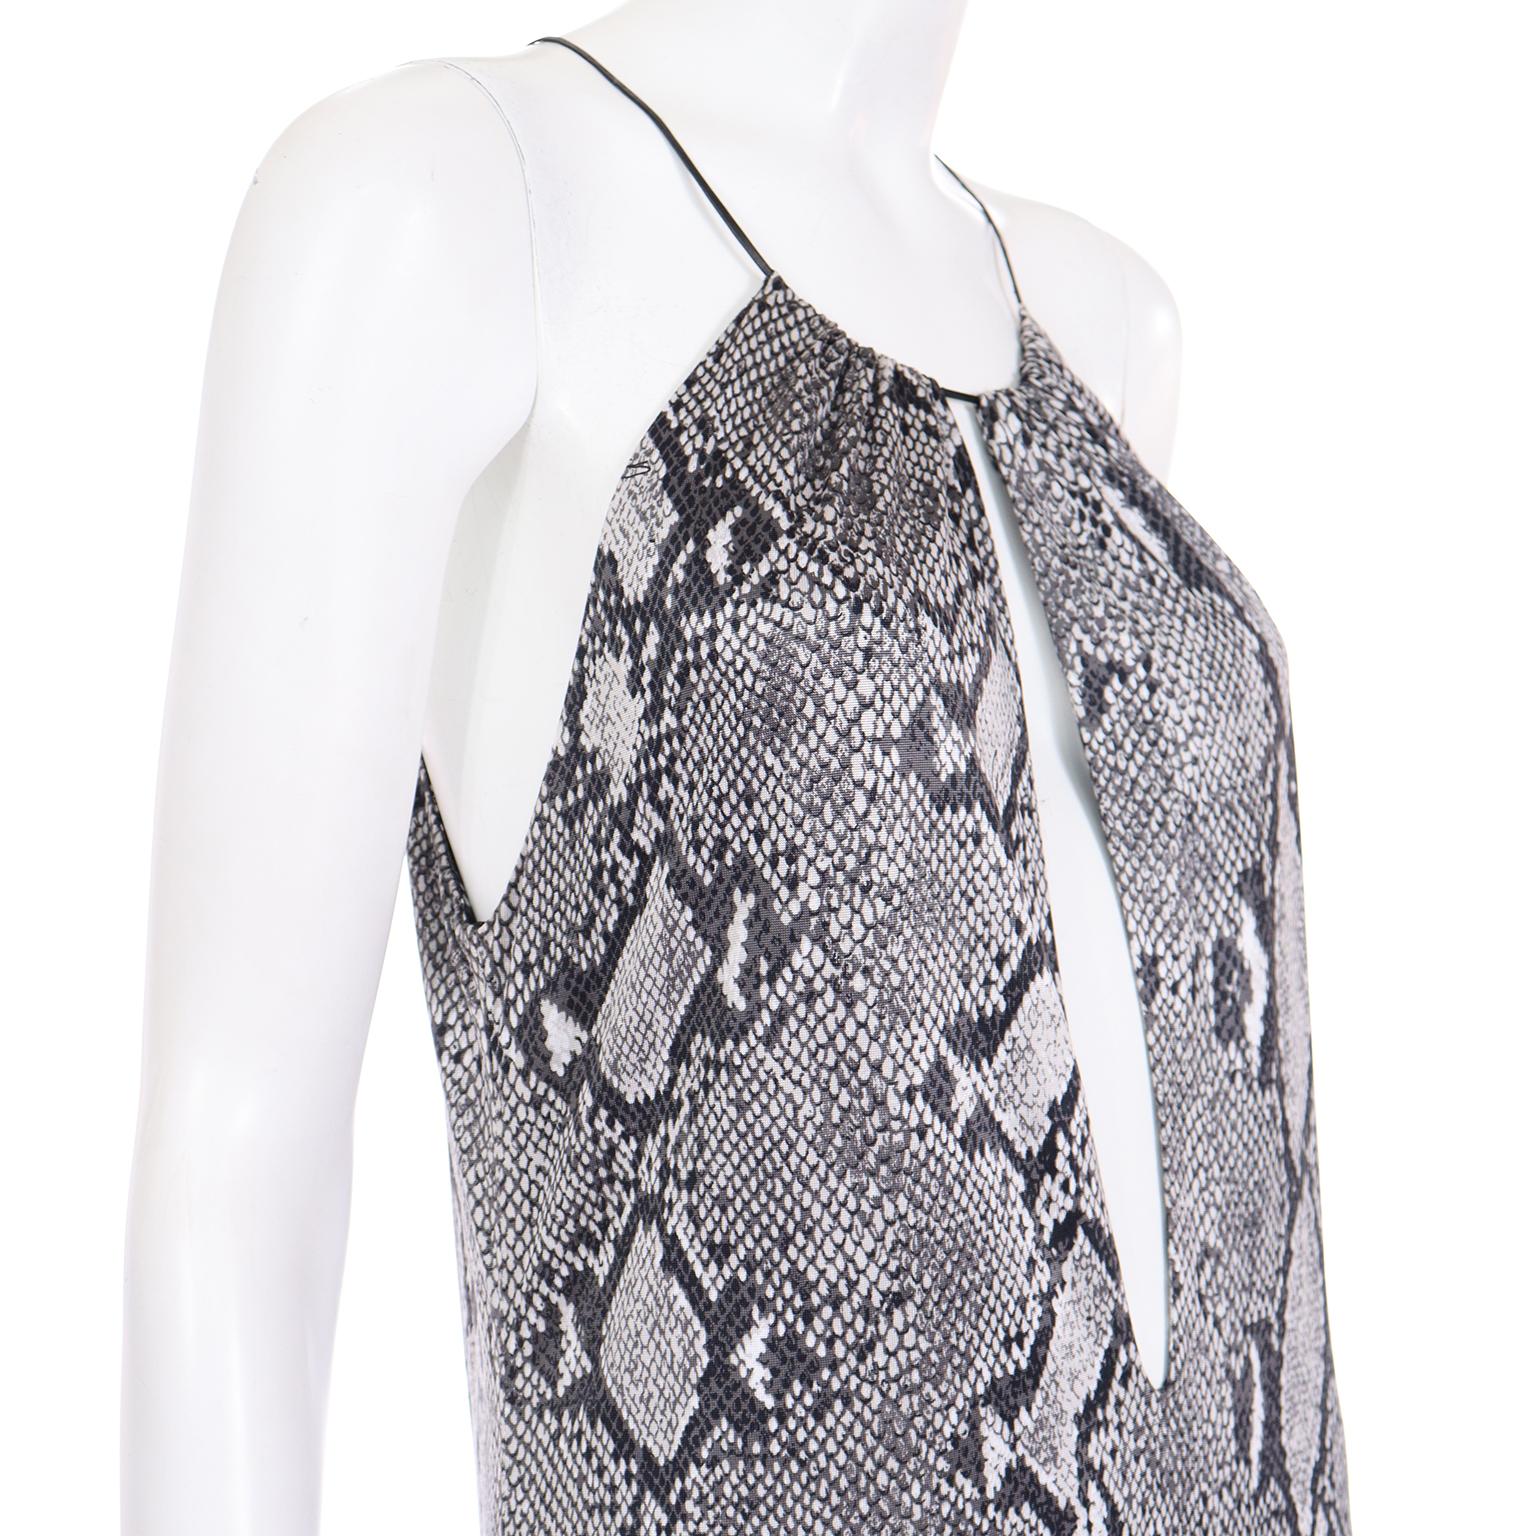 Tom Ford For Gucci S/S 2000 Runway Python Print Rayon Dress w Plunging V For Sale 2